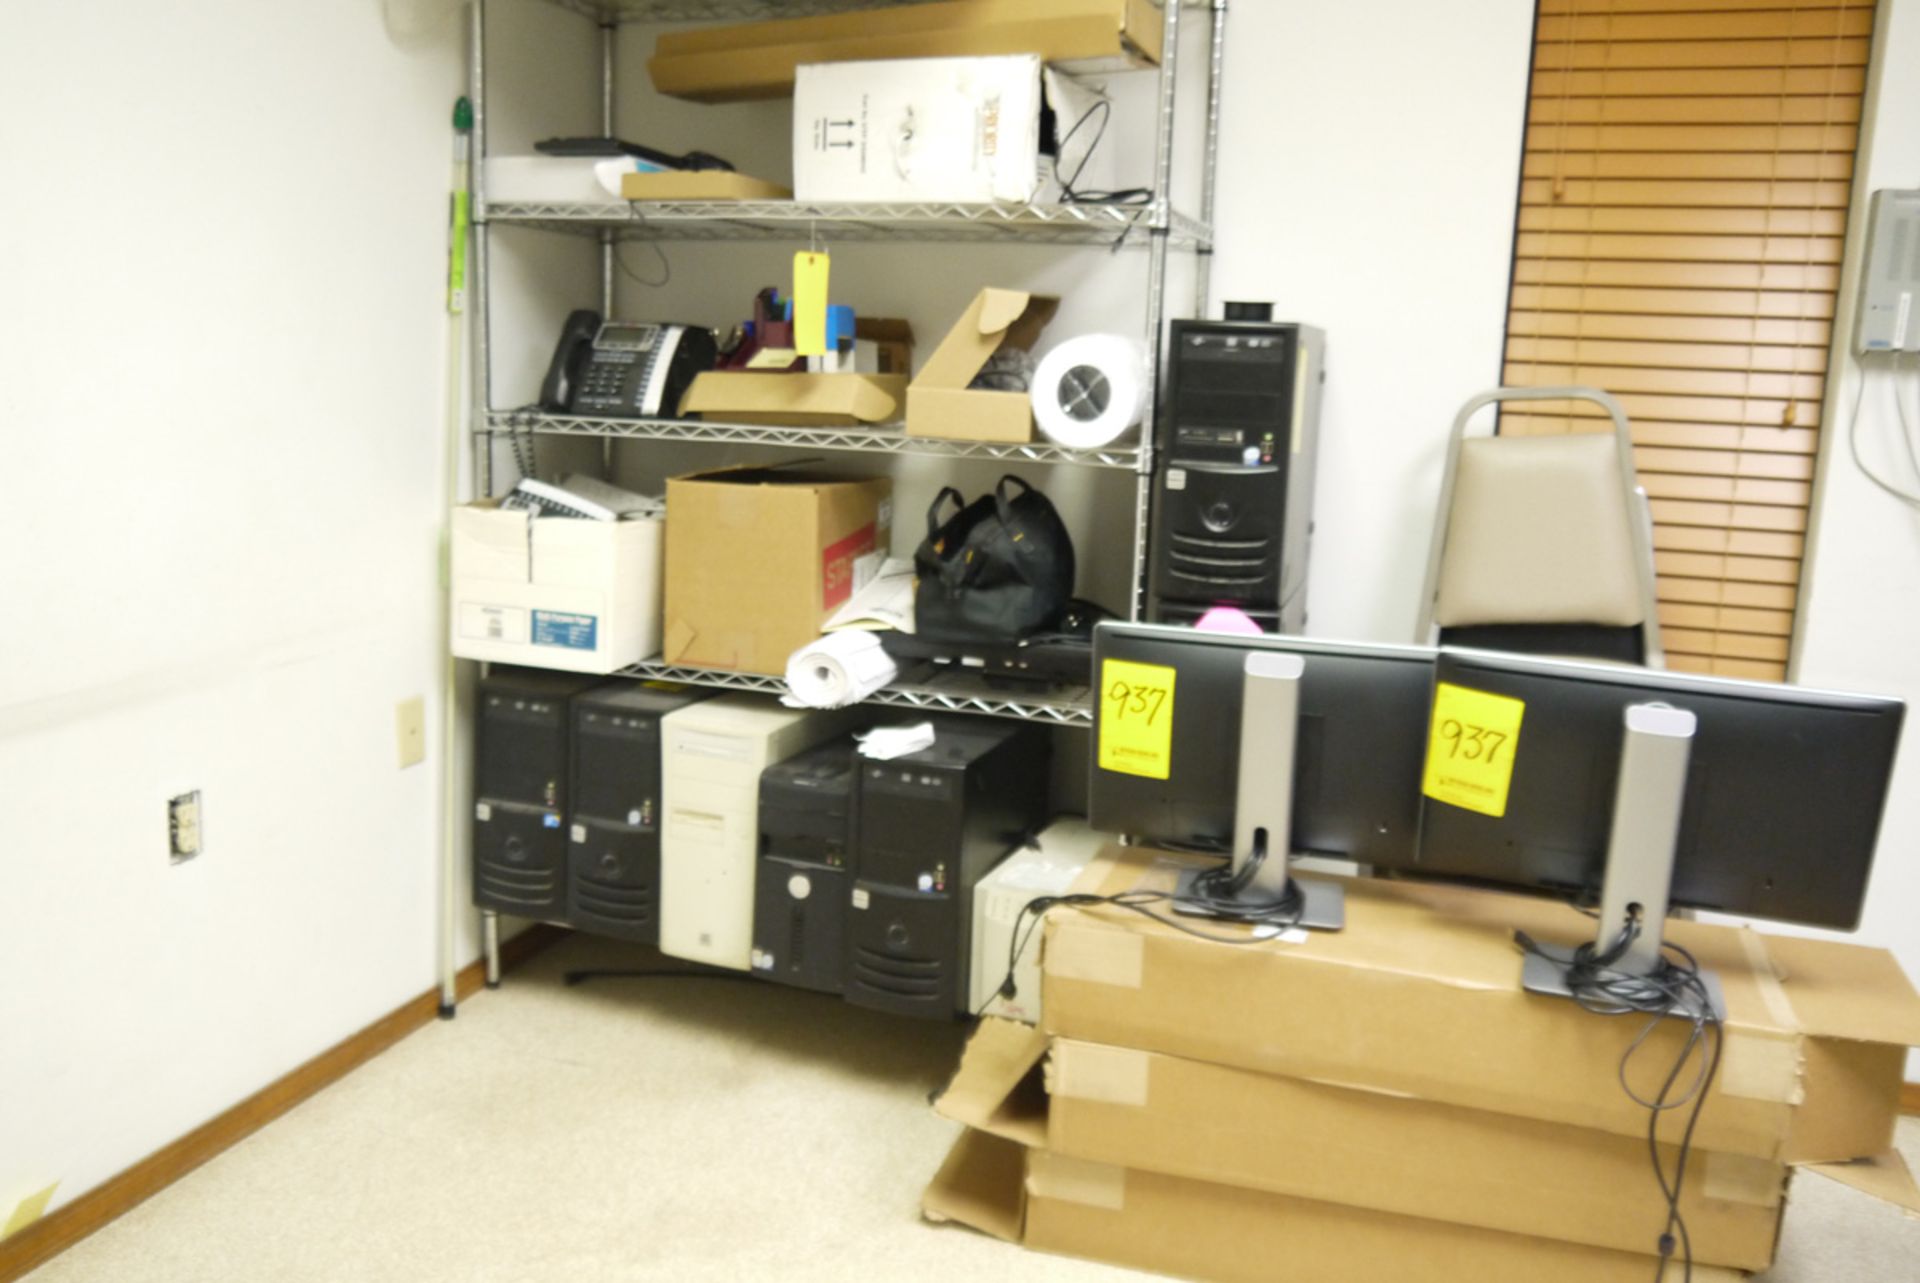 METRO SHELF UNIT, HARD DRIVES, PC MONITORS, TELEPHONES, AND CHAIRS - Image 2 of 2